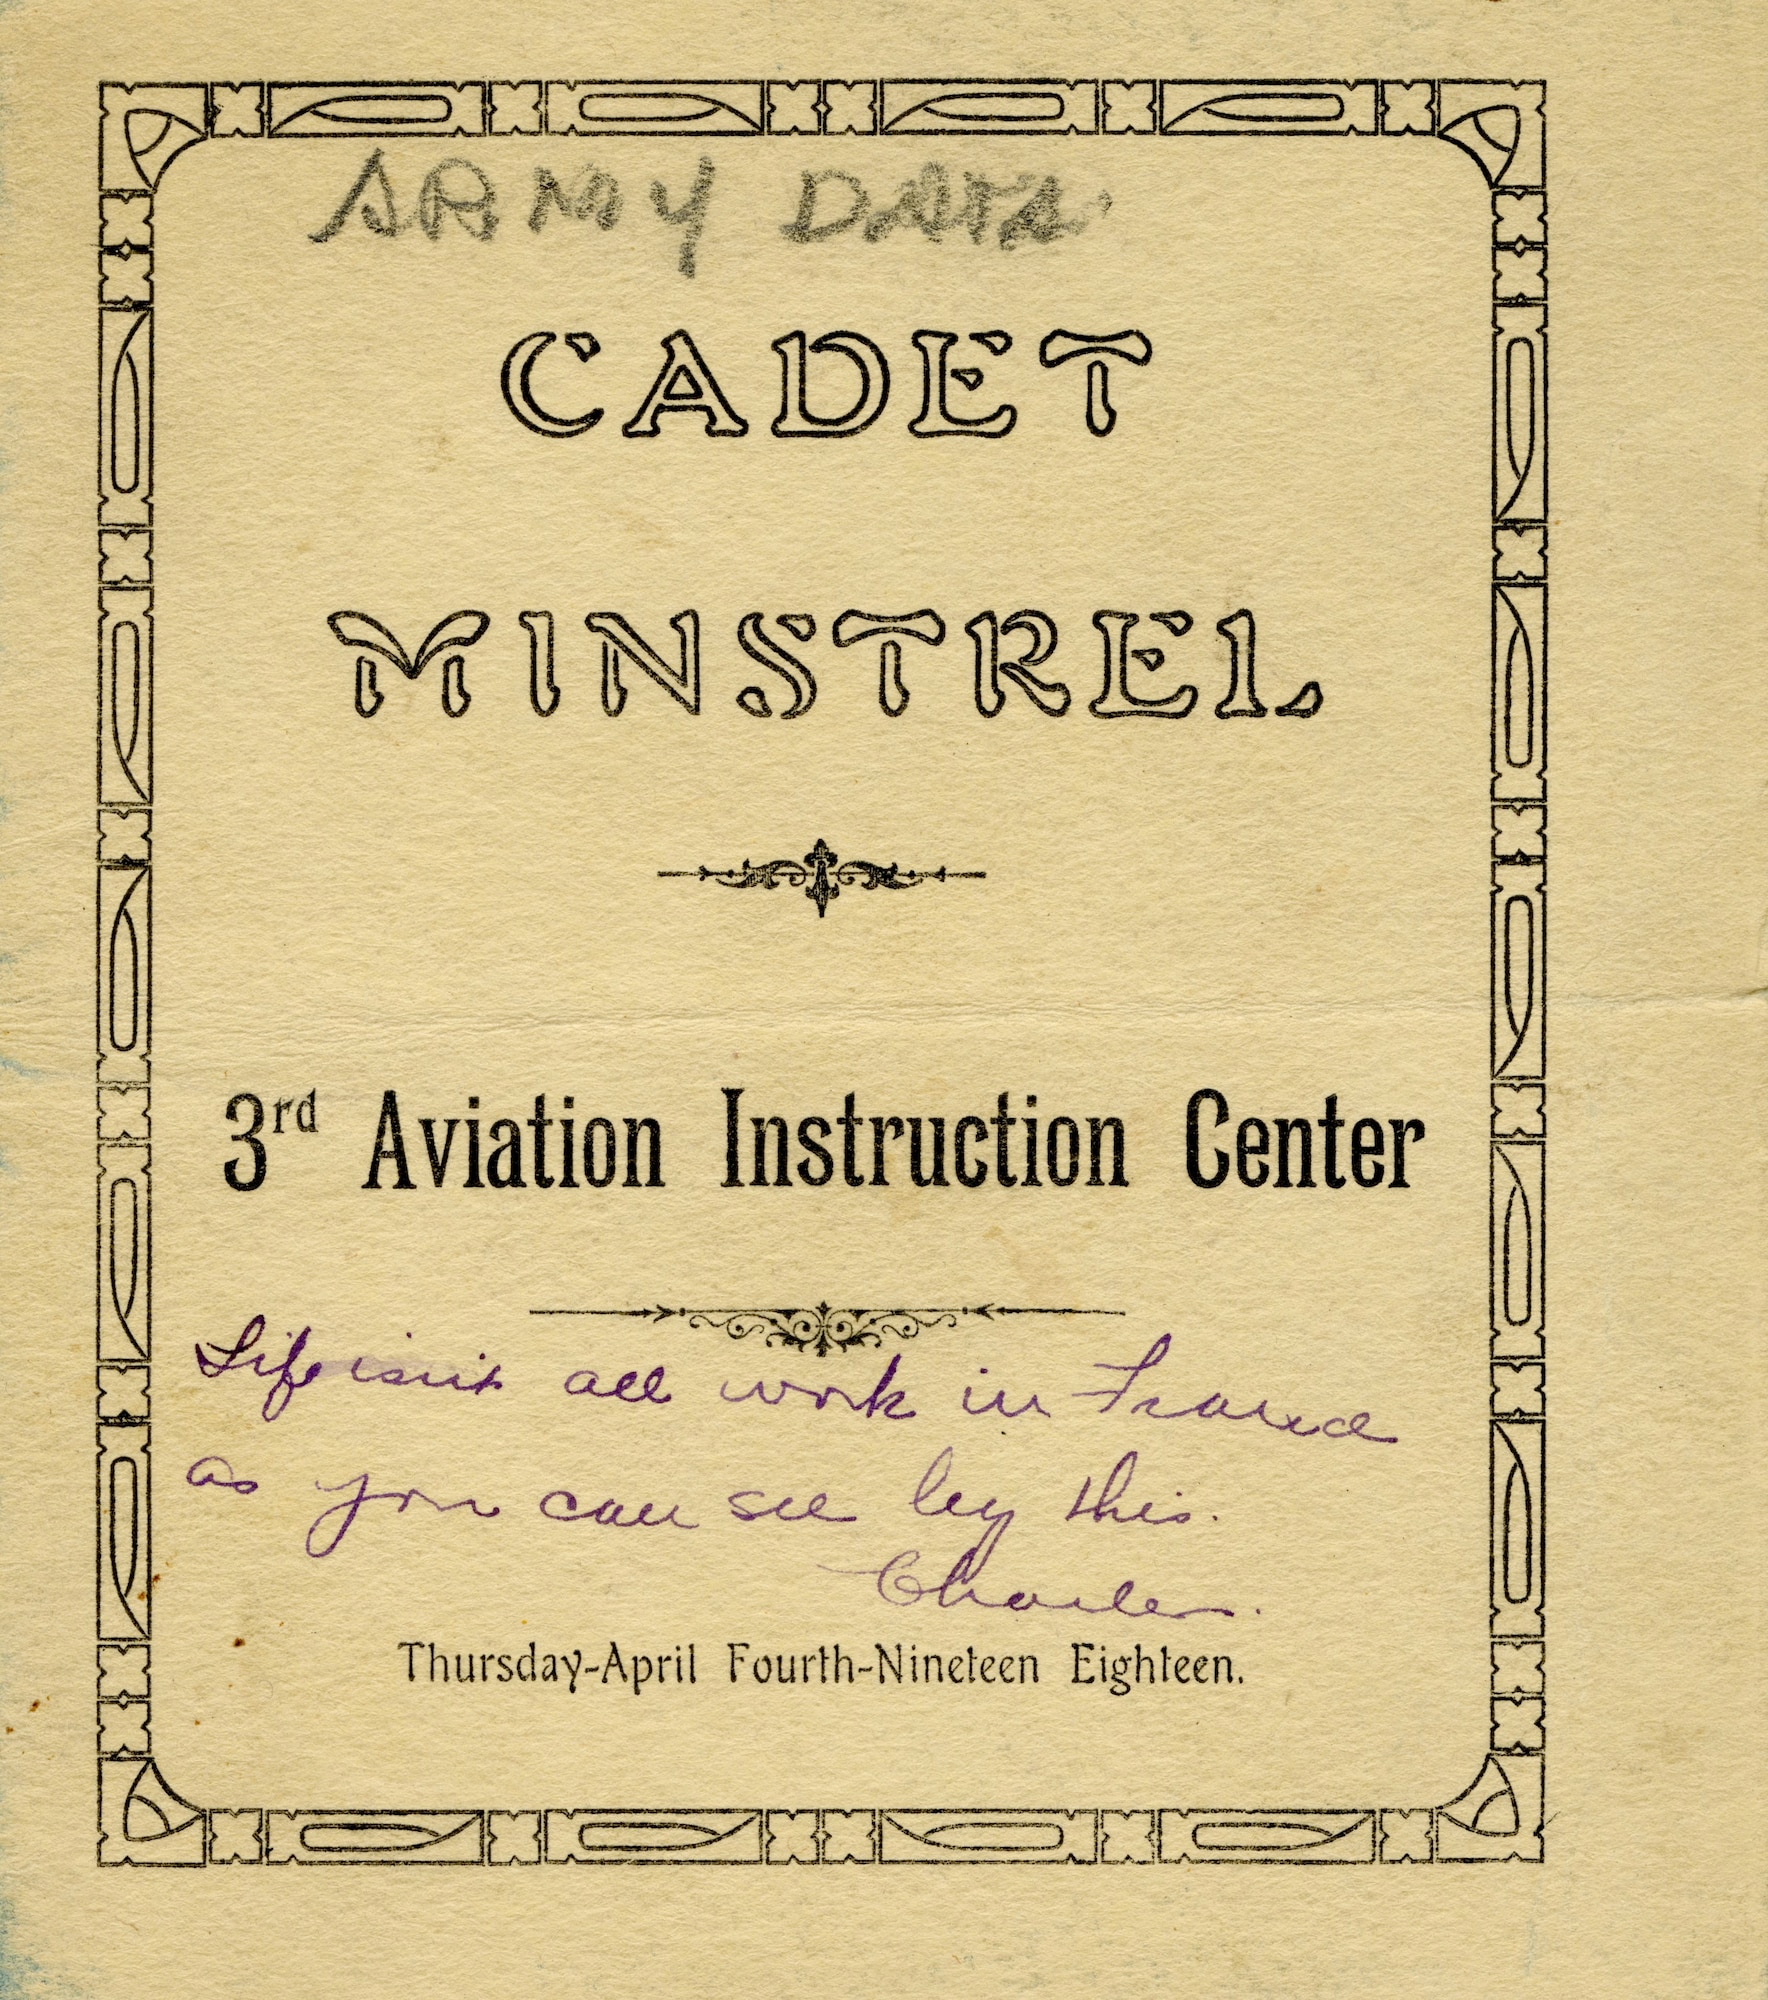 On April 4, 1918, a special musical performance was conducted by the flying staff and cadets to raise morale and break the monotony of the daily flying regimen.  A short program for this event was distributed to attendees and identified all the participating musicians.  Enclosed within the program is a leaf for a follow-on performance by many of the same musicians held at Chateauroux, France a few weeks later on April 27, 1918. (U.S. Air Force image)